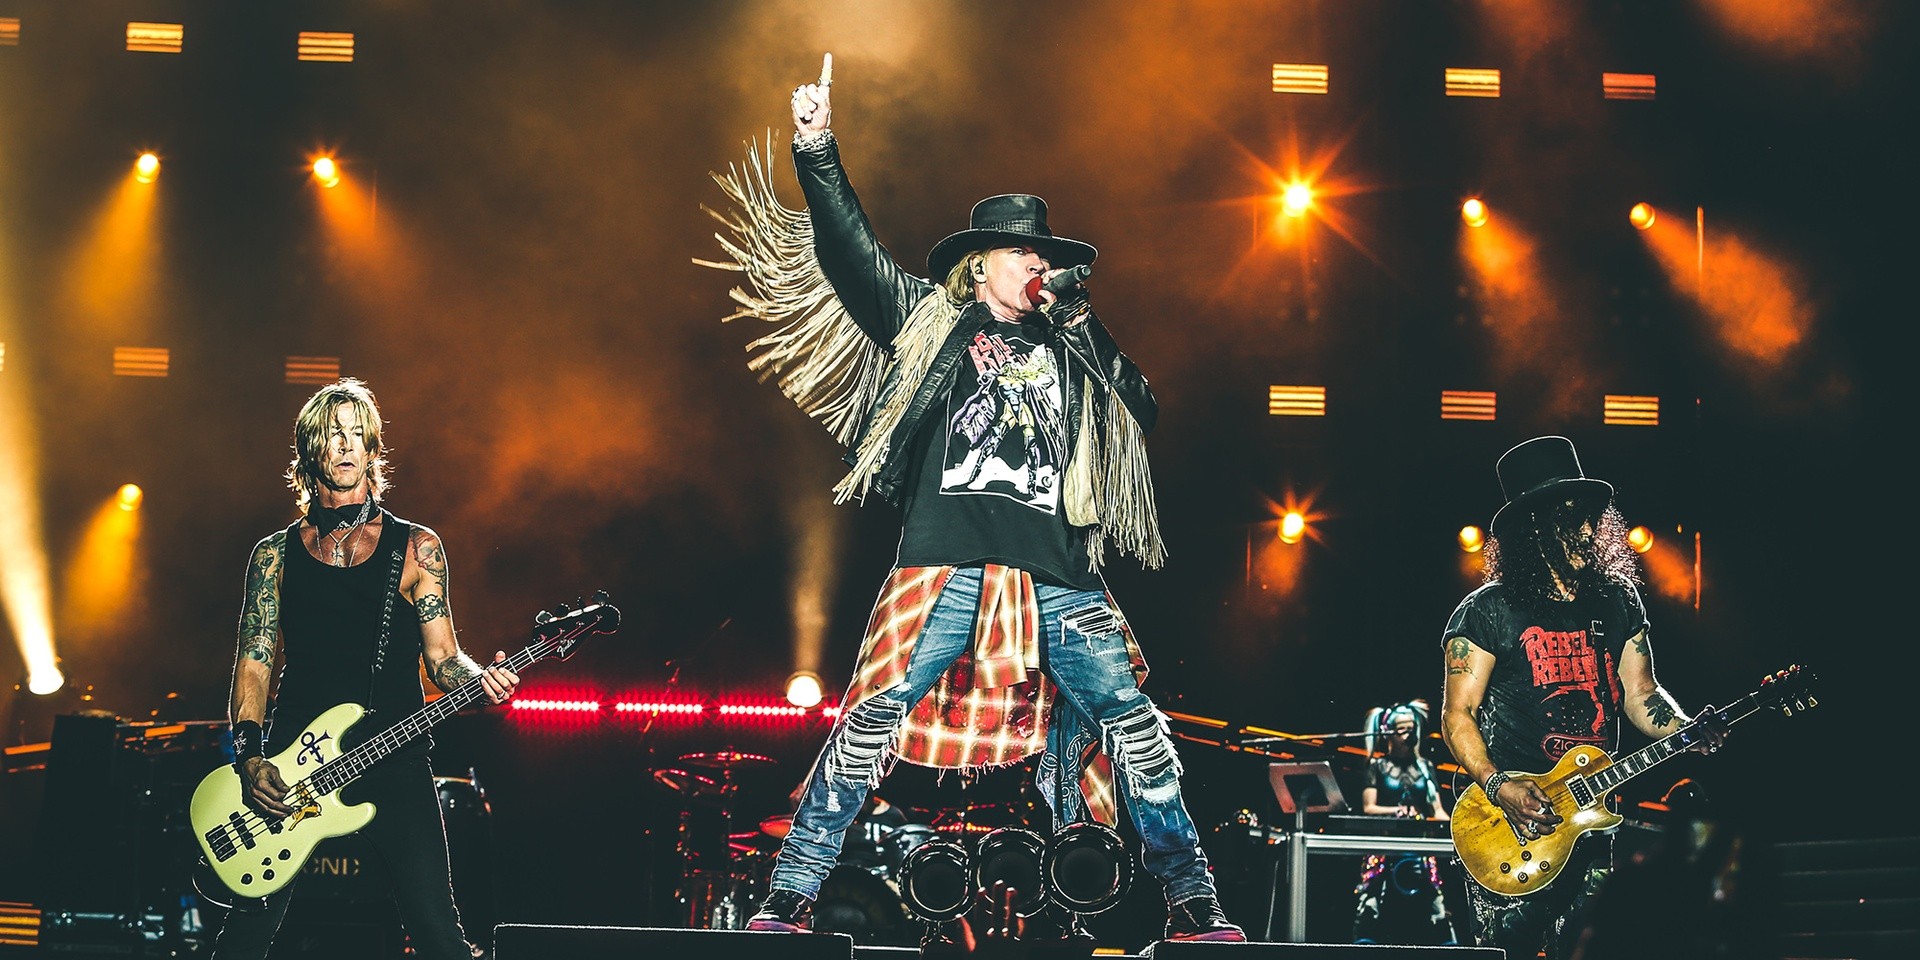 It's official: Guns N' Roses are coming to Singapore for their only Southeast Asian date